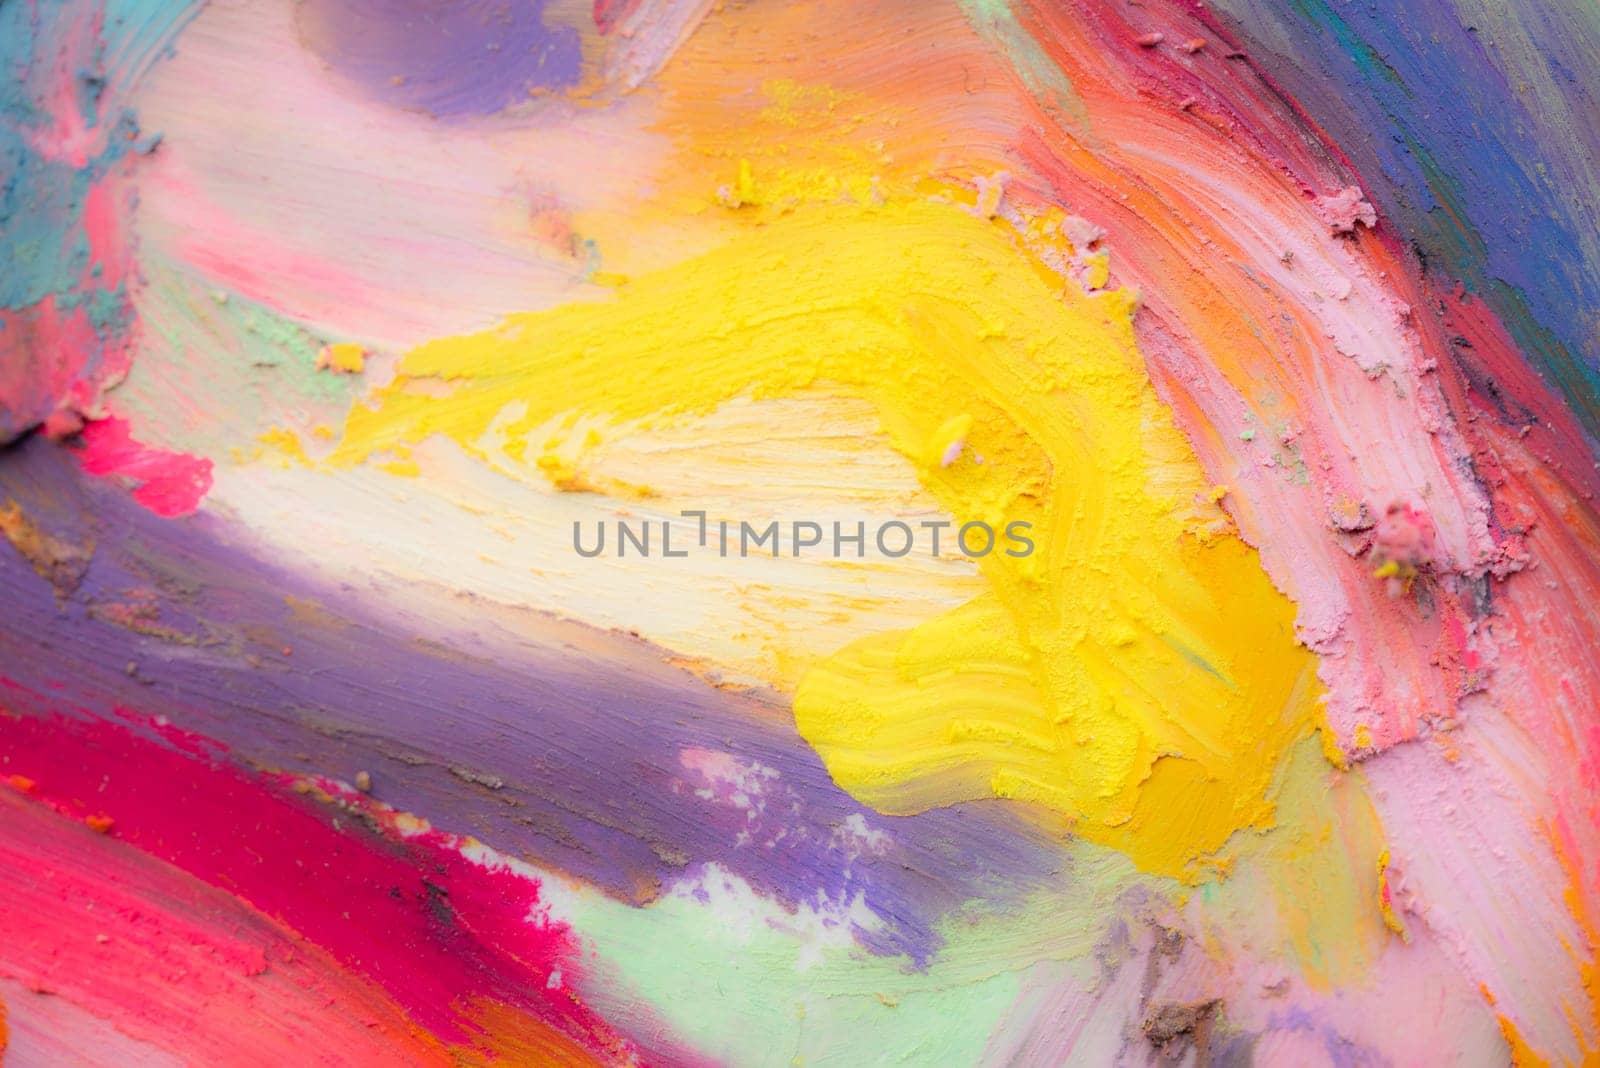 Picture drawning with oil pastels. Conceptual abstract picture. Fragment of multicolored texture painting. Abstract art background. Rough brushstrokes of paint. Highly-textured, high quality details.